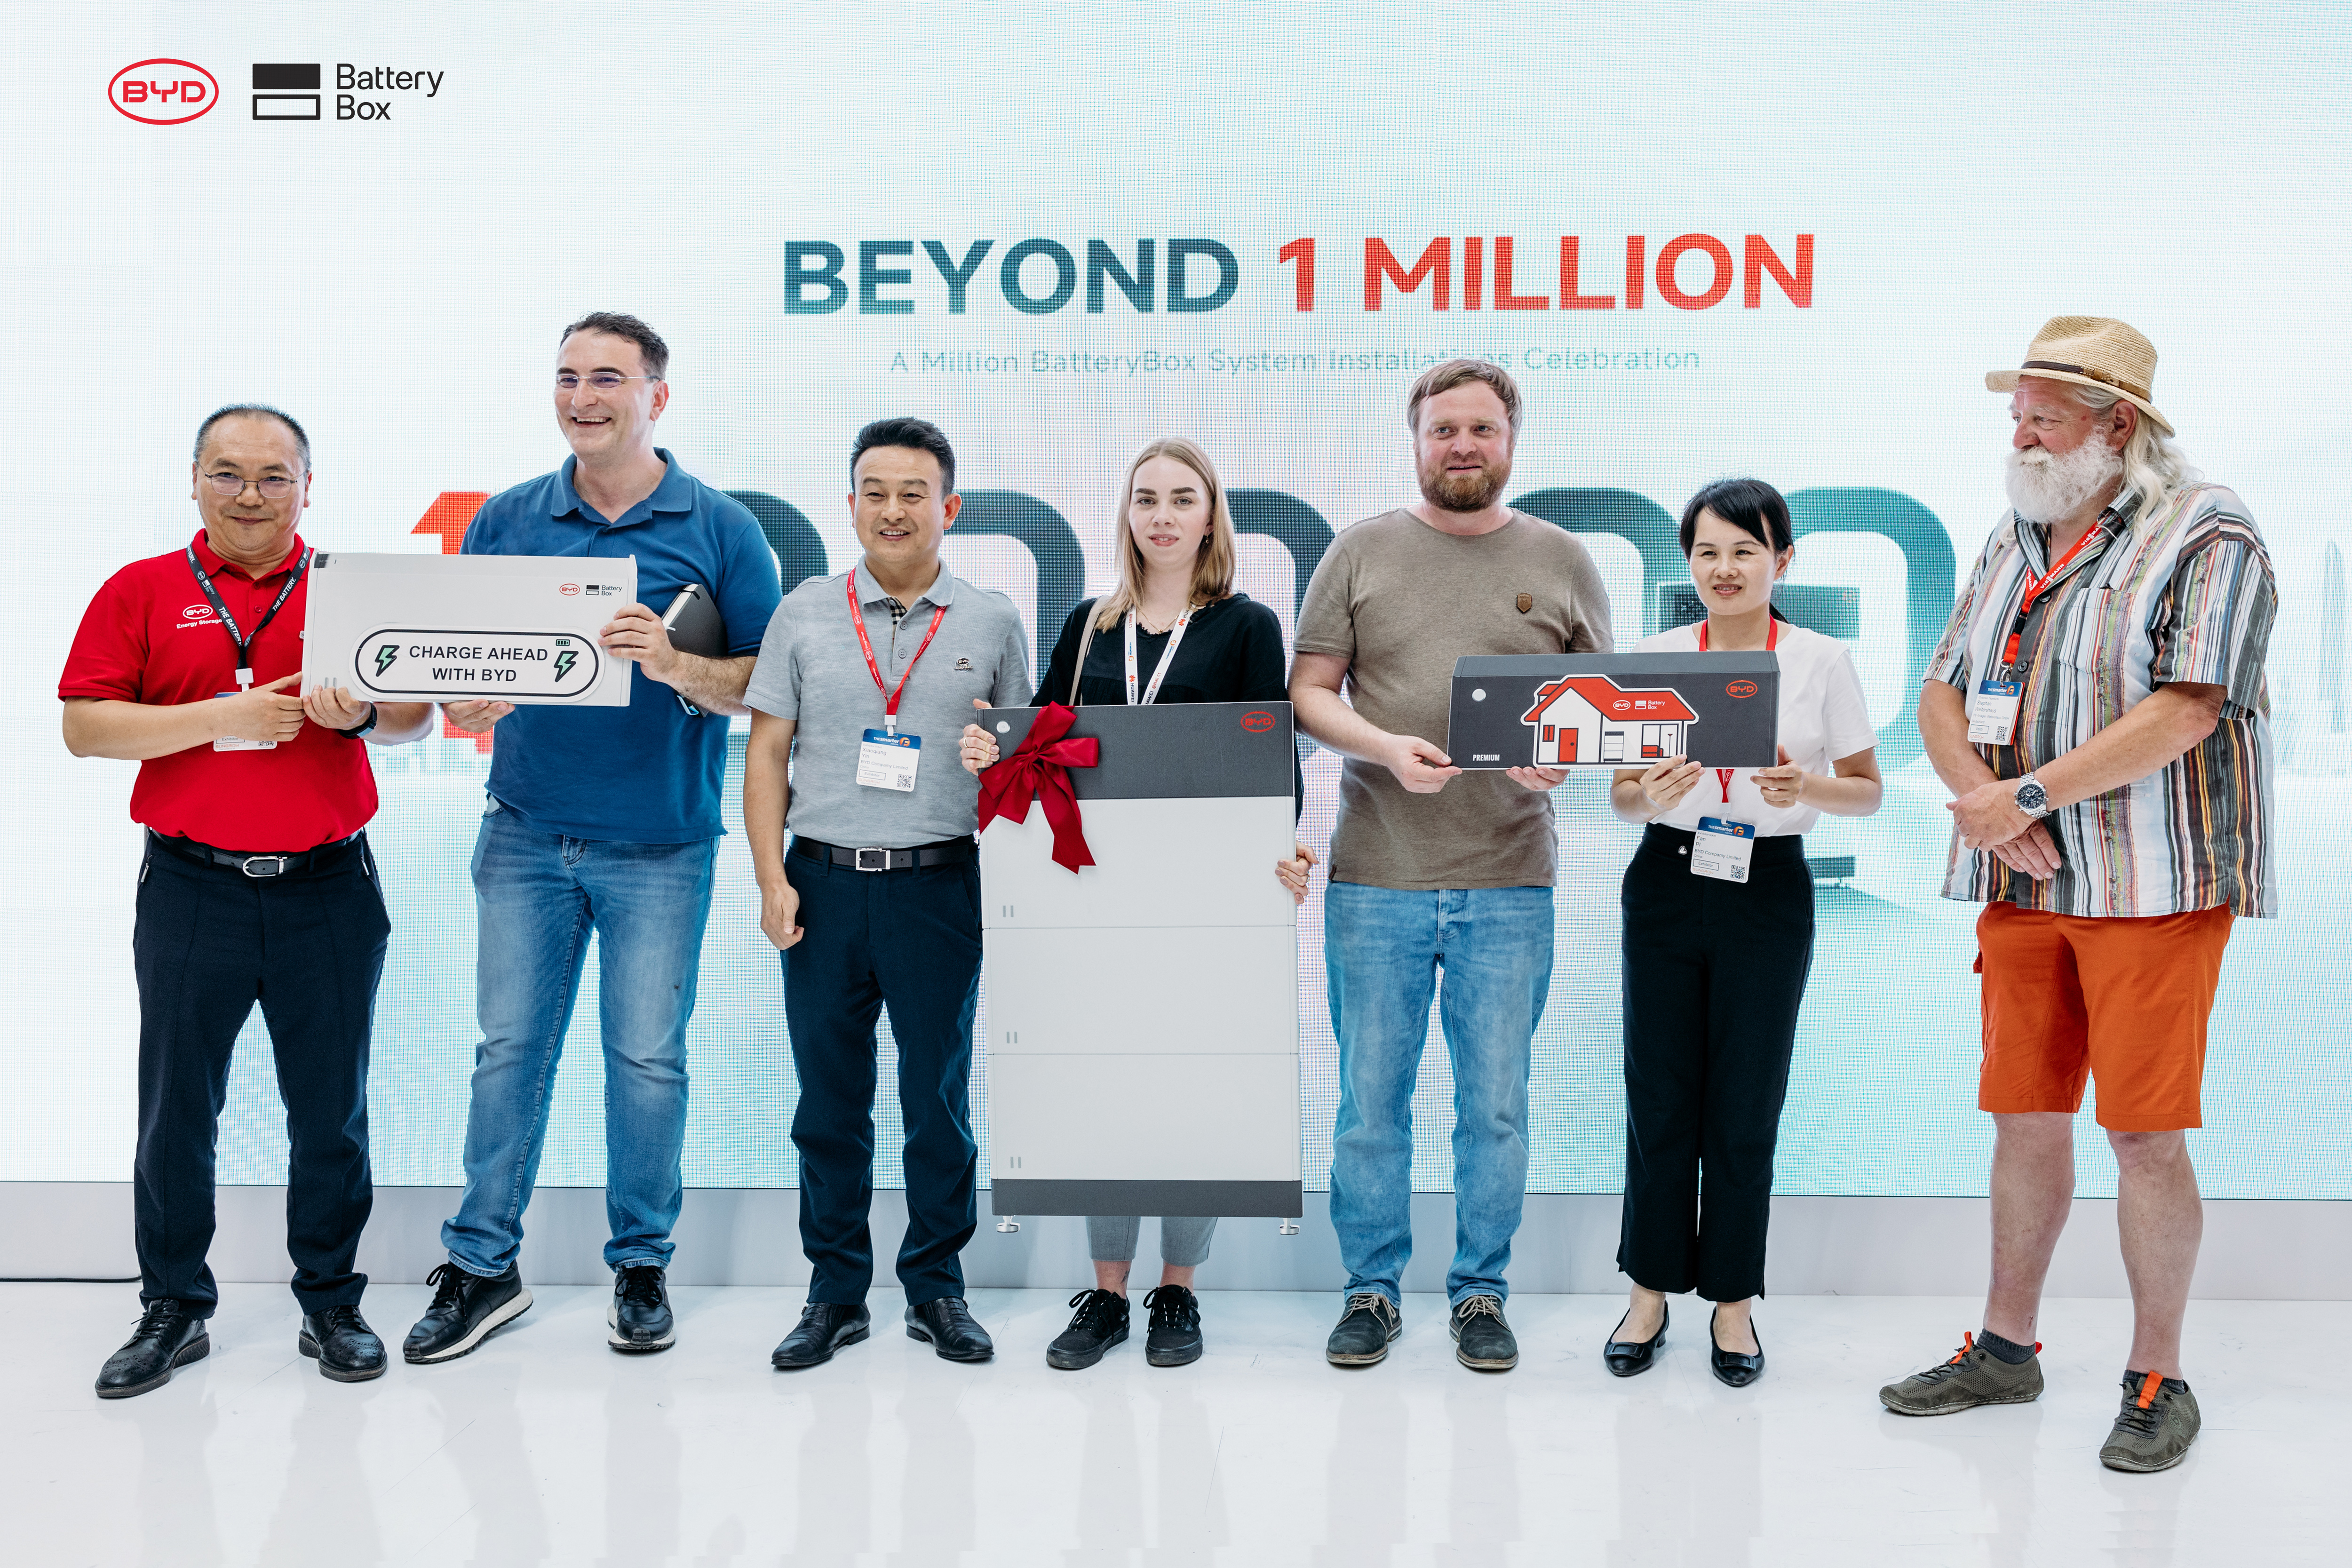 BYD celebrates over 1 million installed BatteryBox systems